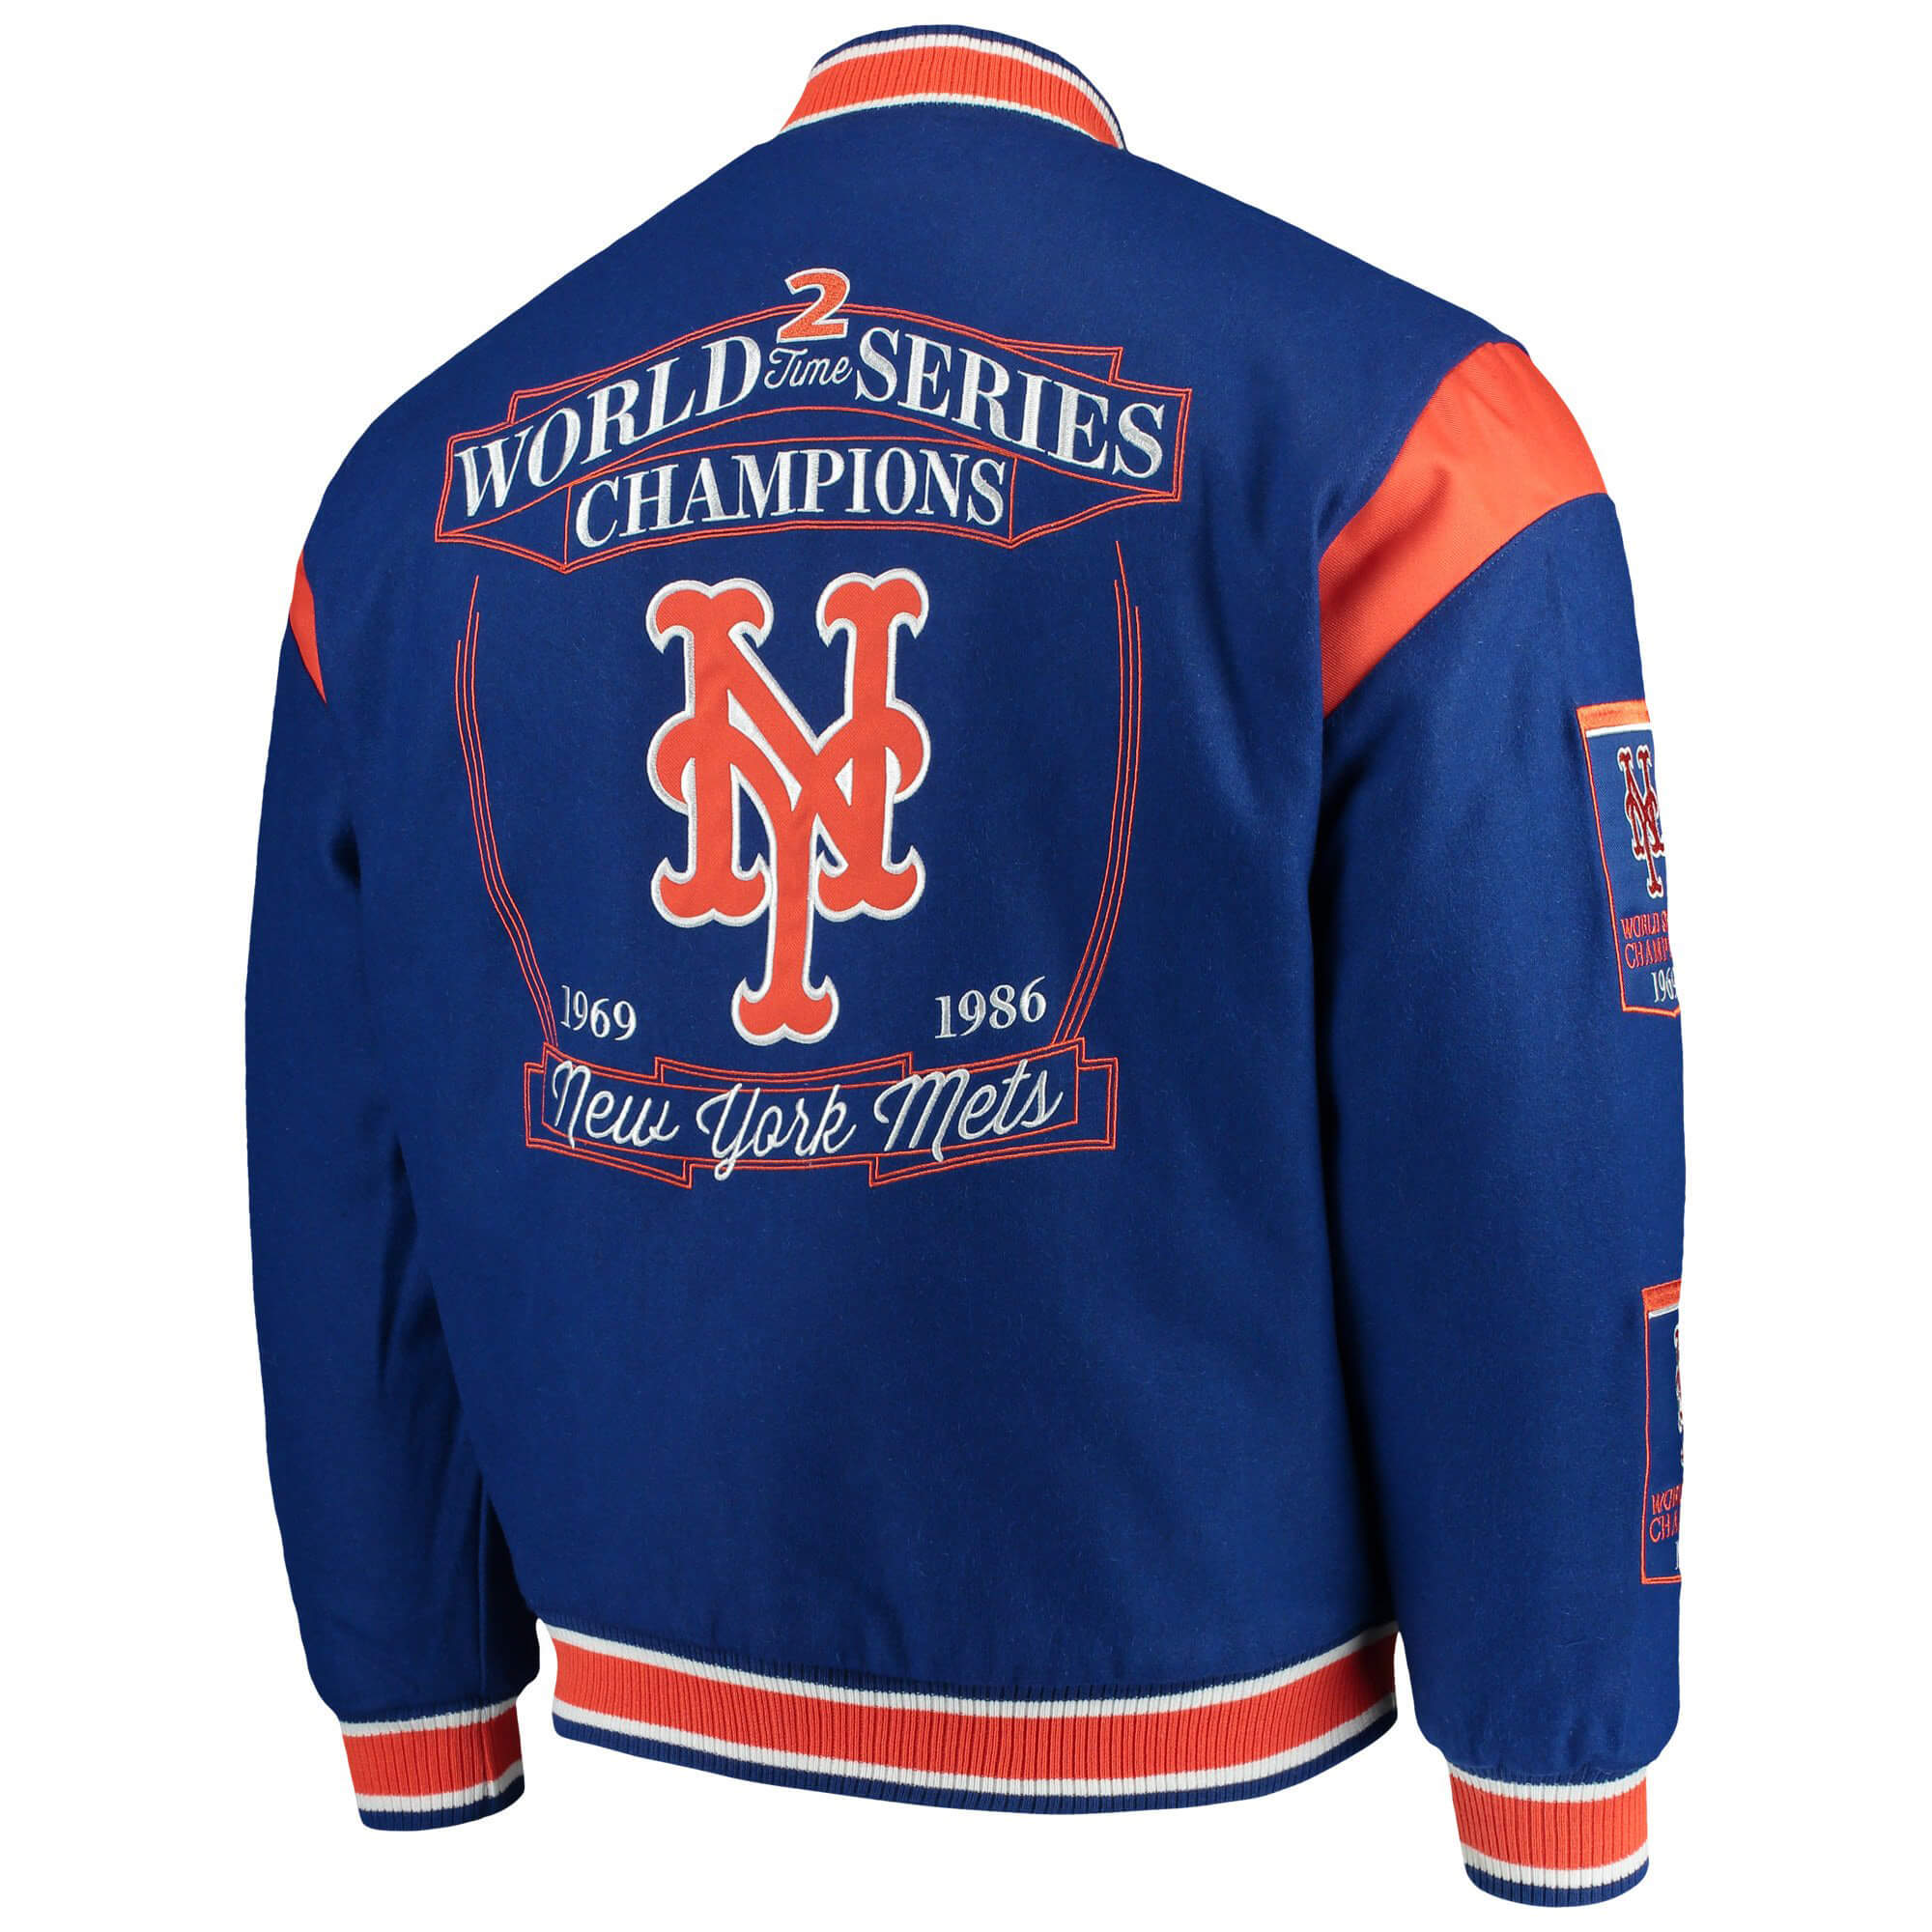 Maker of Jacket Fashion Jackets New York Mets 2 Time World Series Champions